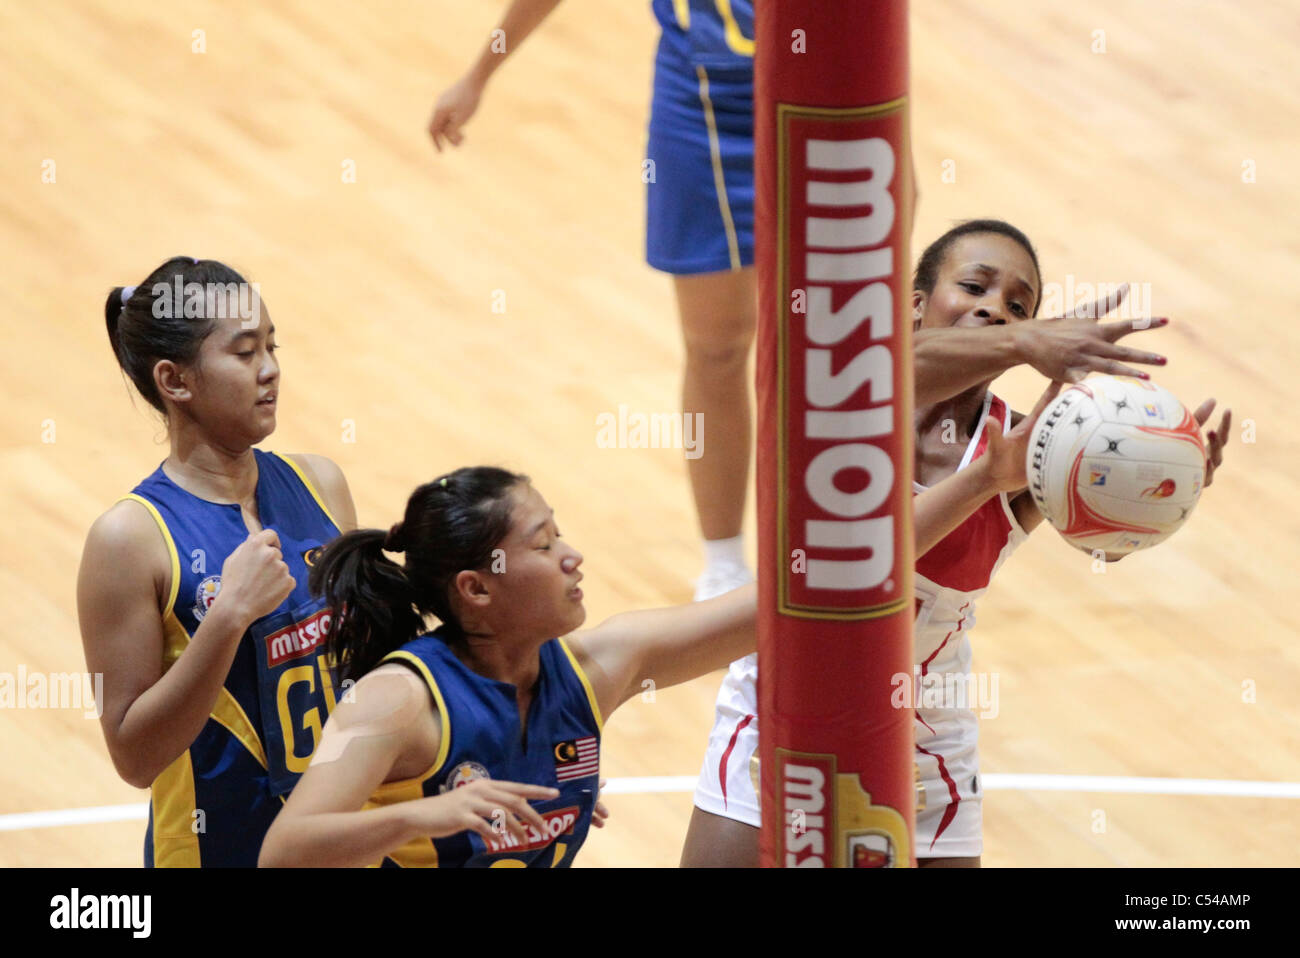 06.07.2011 Pamela Cookey of England(right) battles with Siti Nor Farhana for the ball during the Pool D match between England VS Malaysia, Mission Foods World Netball Championships 2011 from the Singapore Indoor Stadium in Singapore. Stock Photo